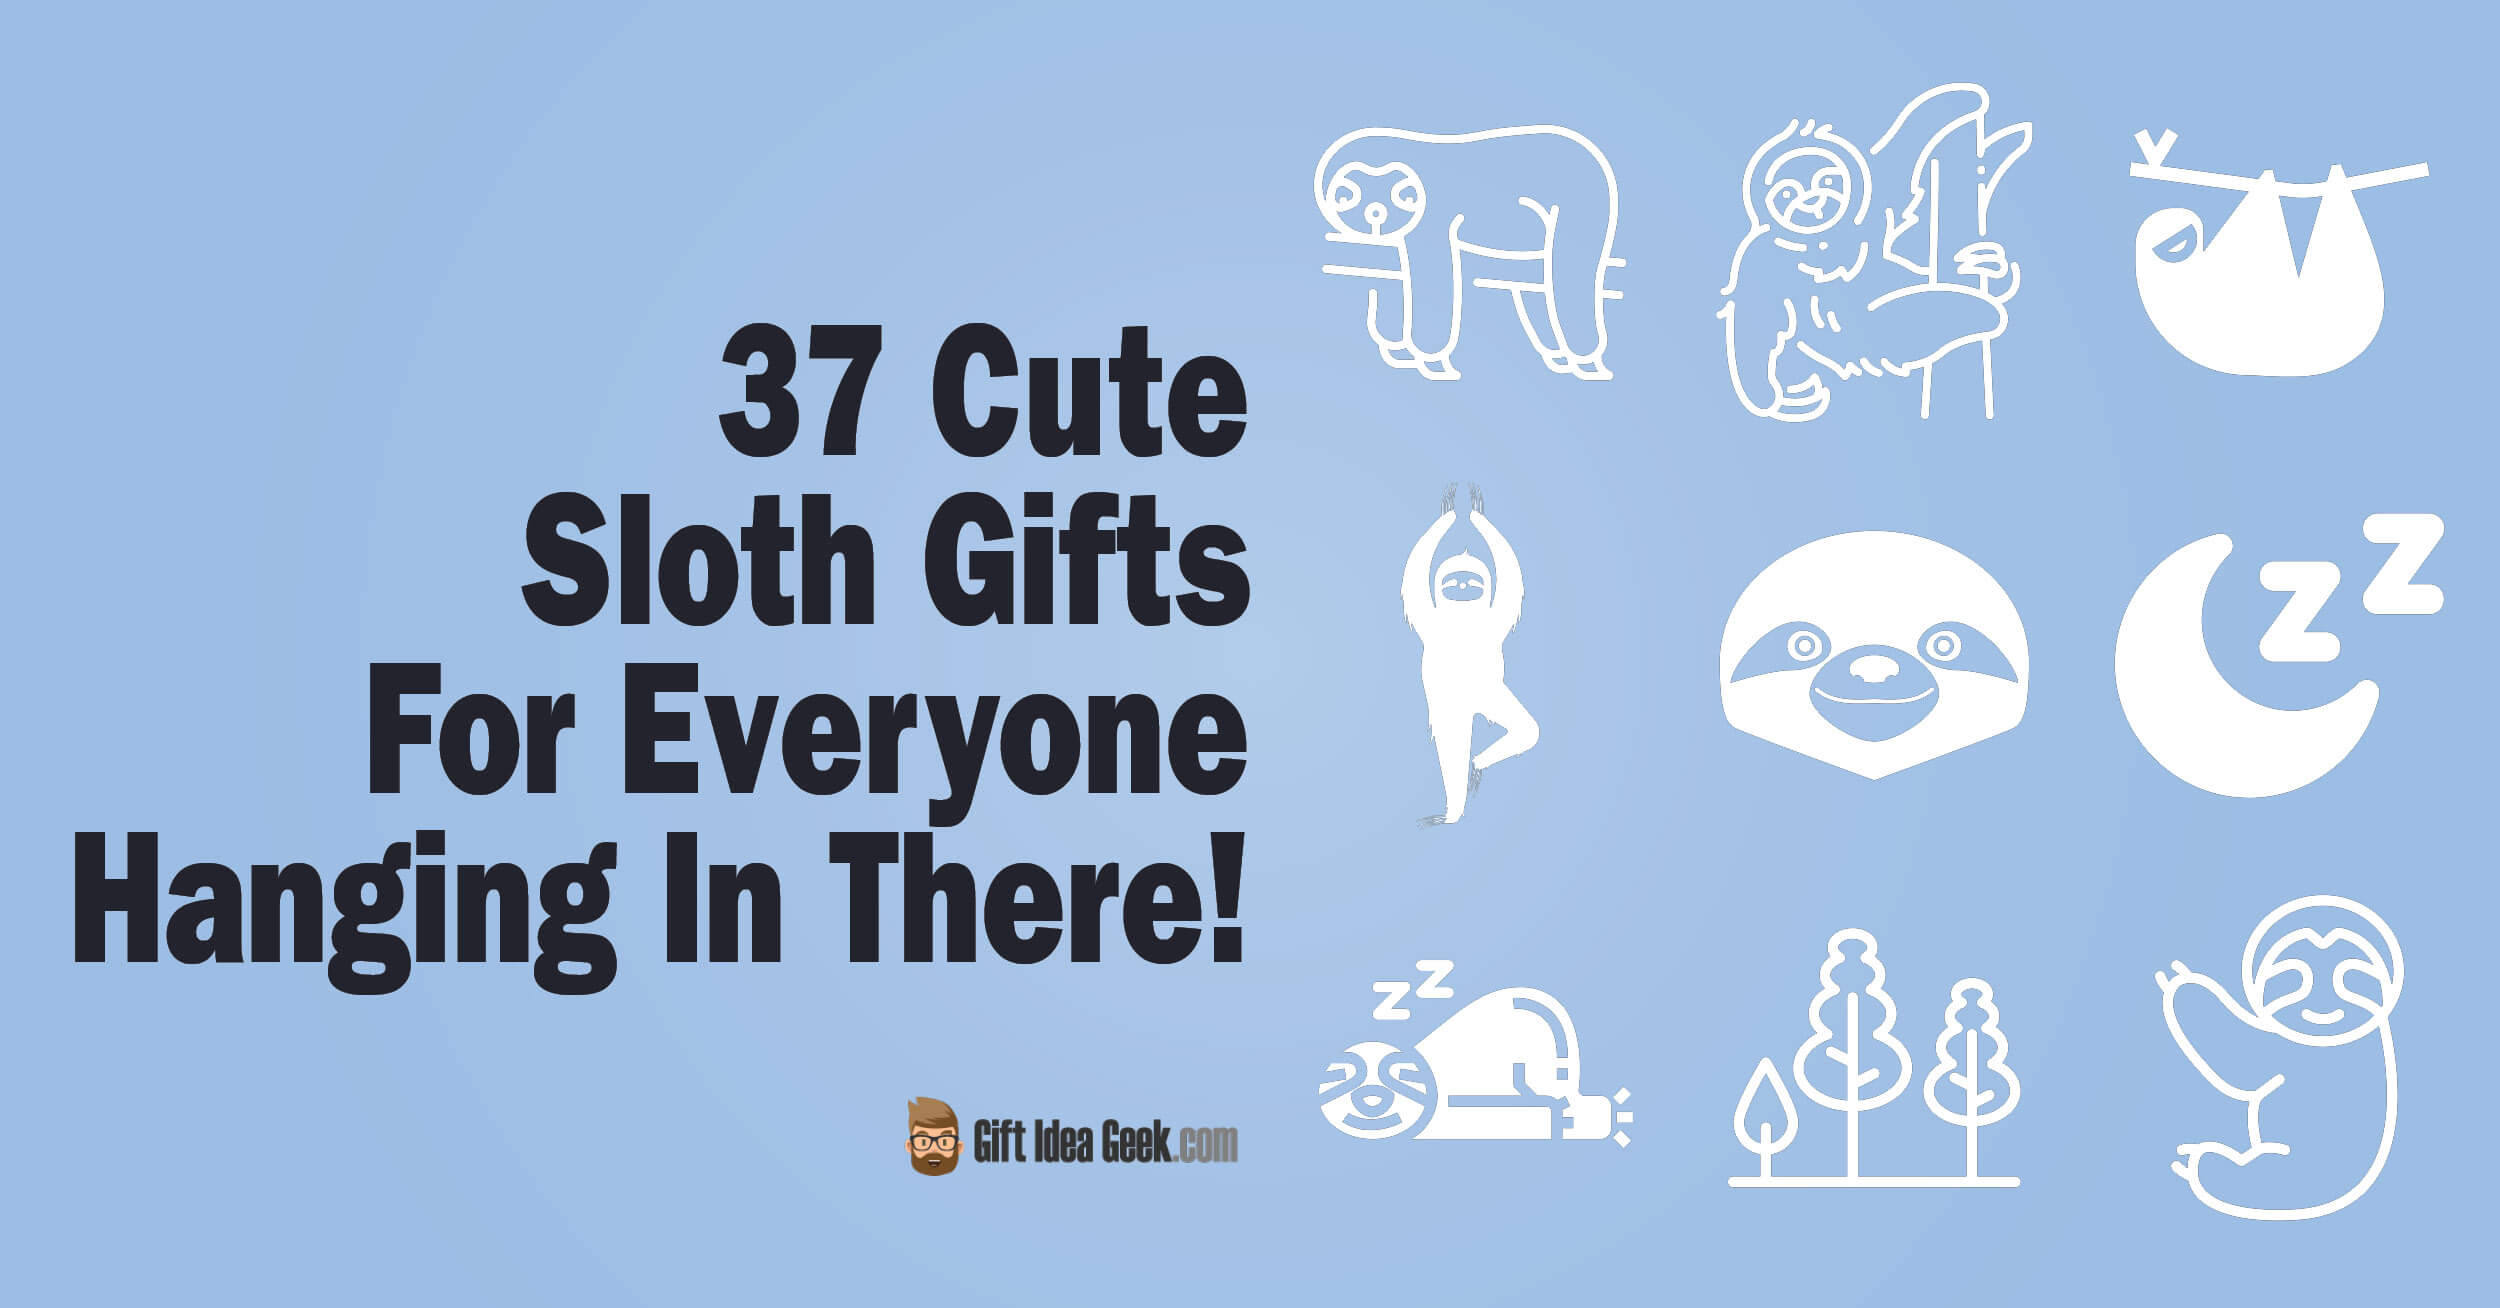 37 Cute Sloth Gifts For Everyone Hanging In There!